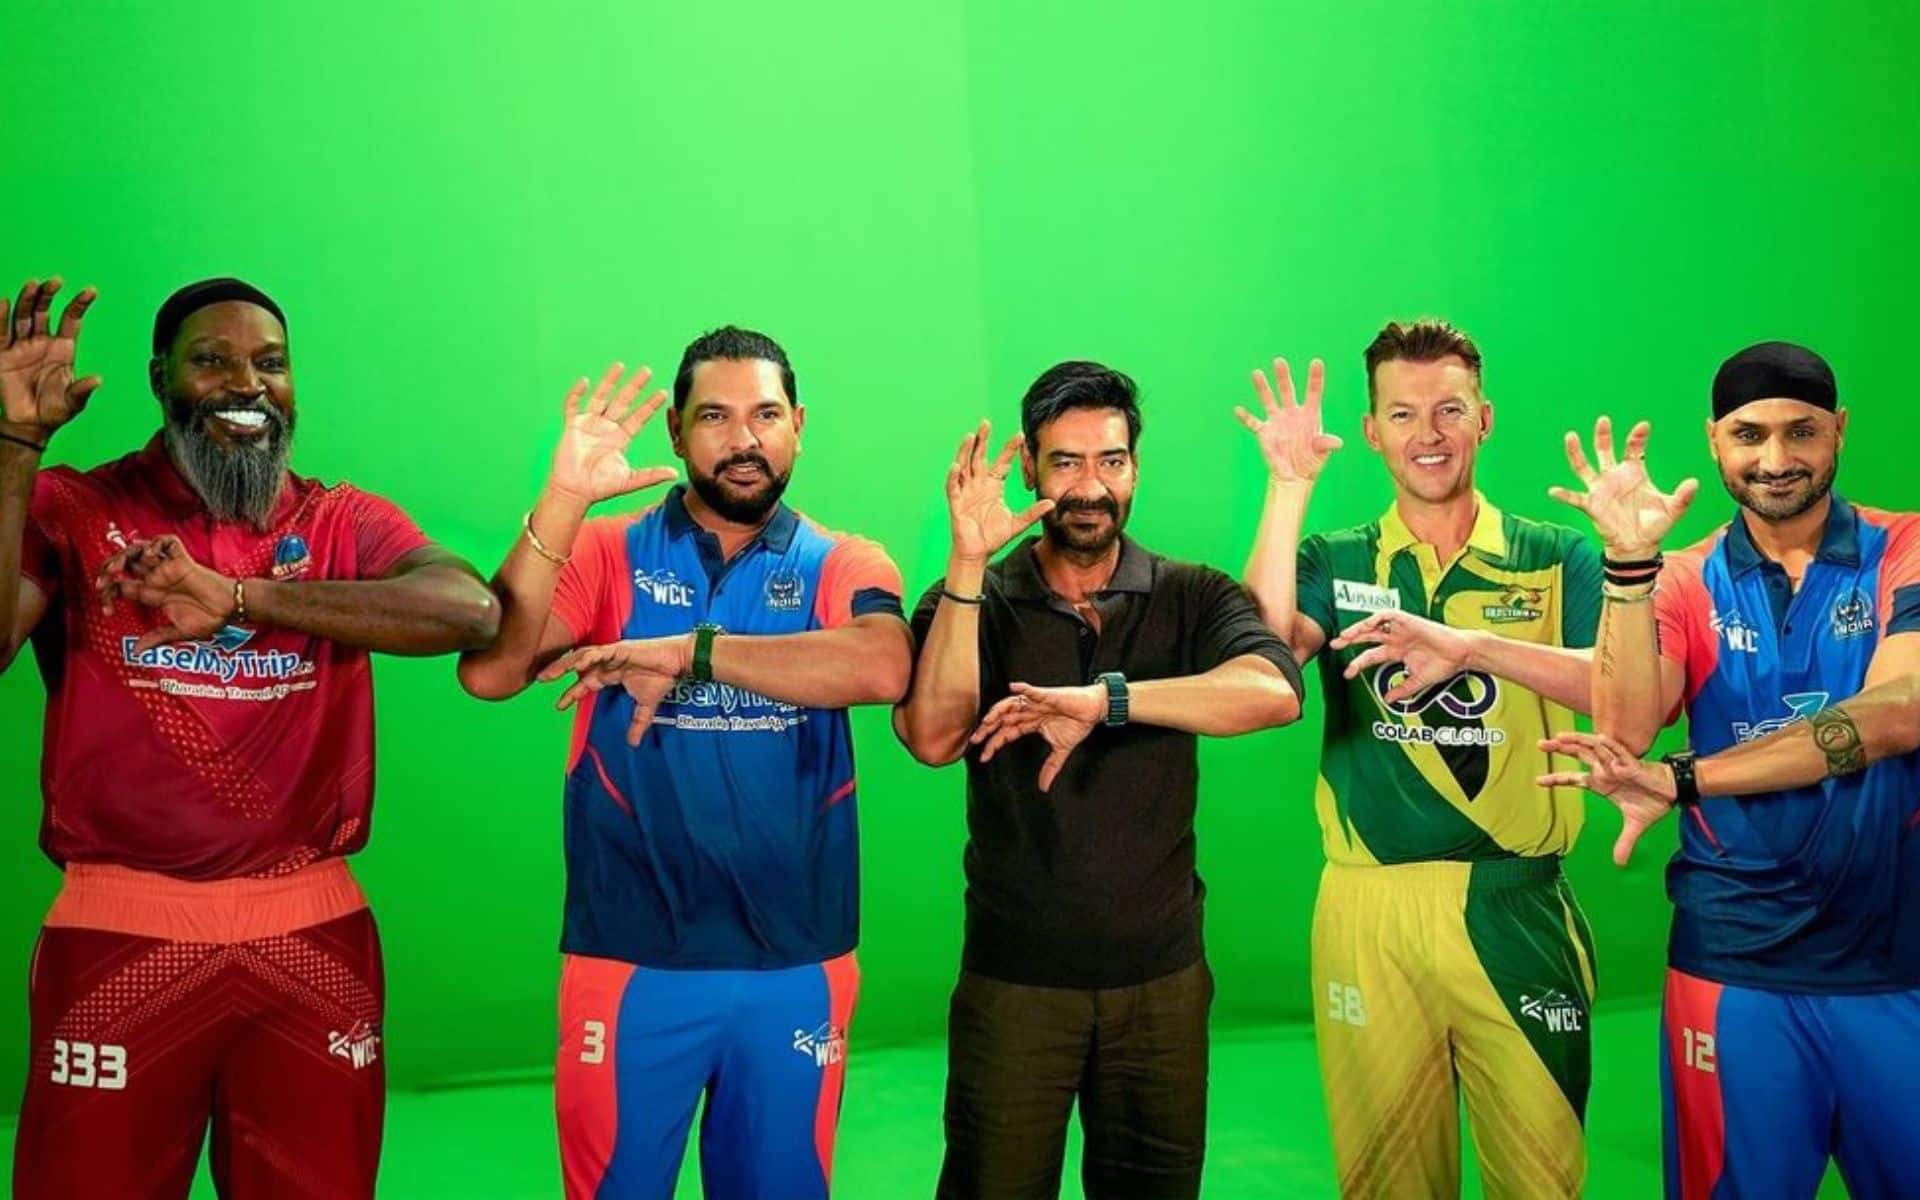  Yuvraj, Harbhajan, Gayle, Lee posing with Ajay Devgn for a picture (X.com)